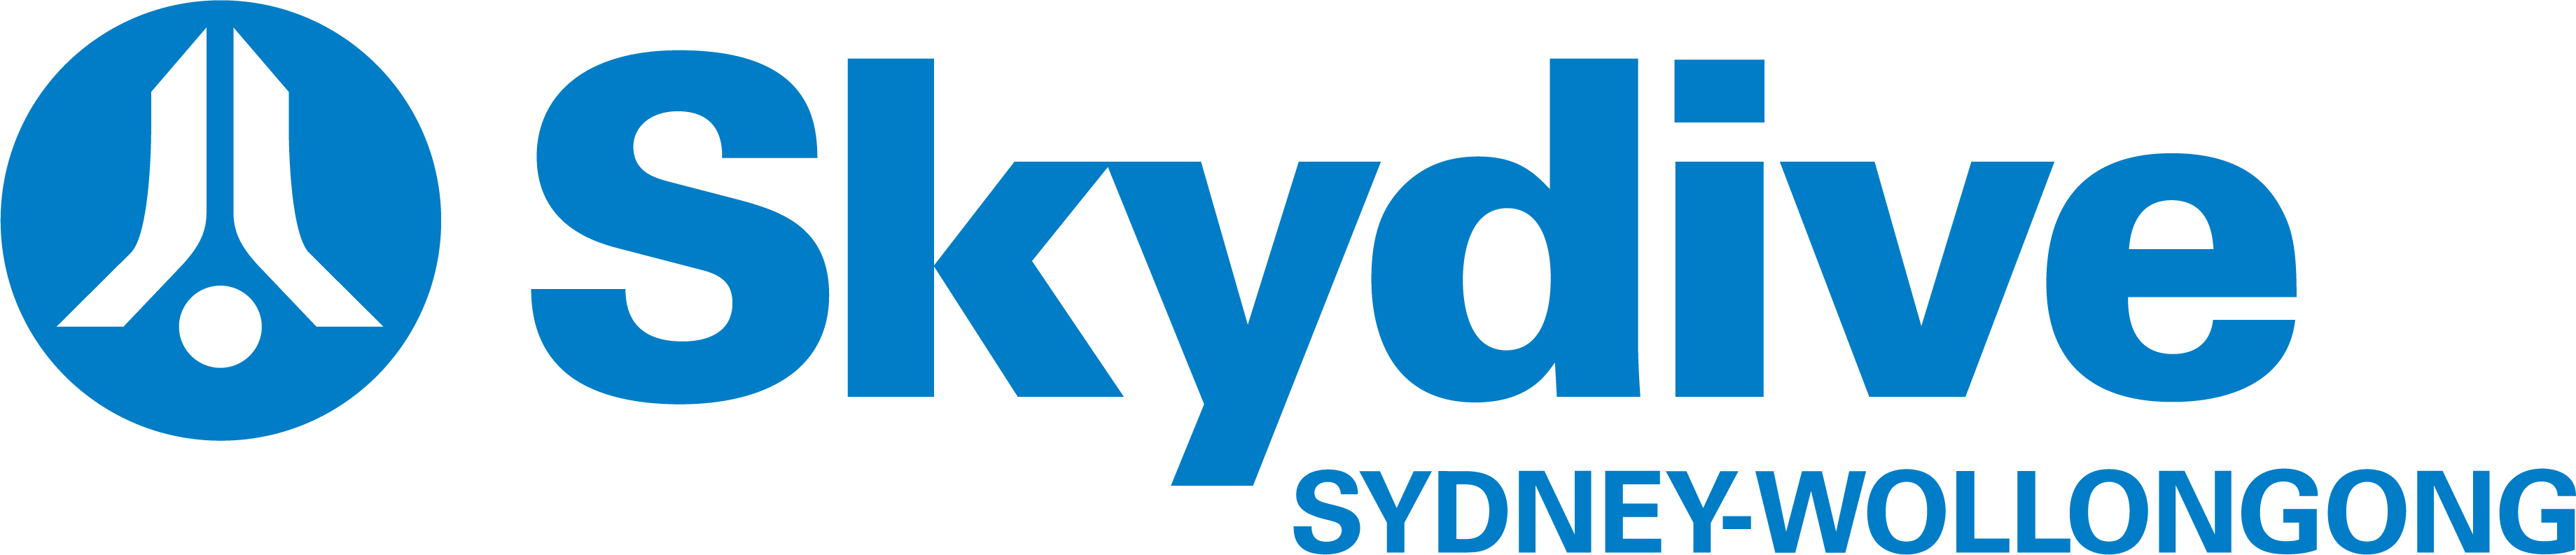 Skydive Sydney – Wollongong